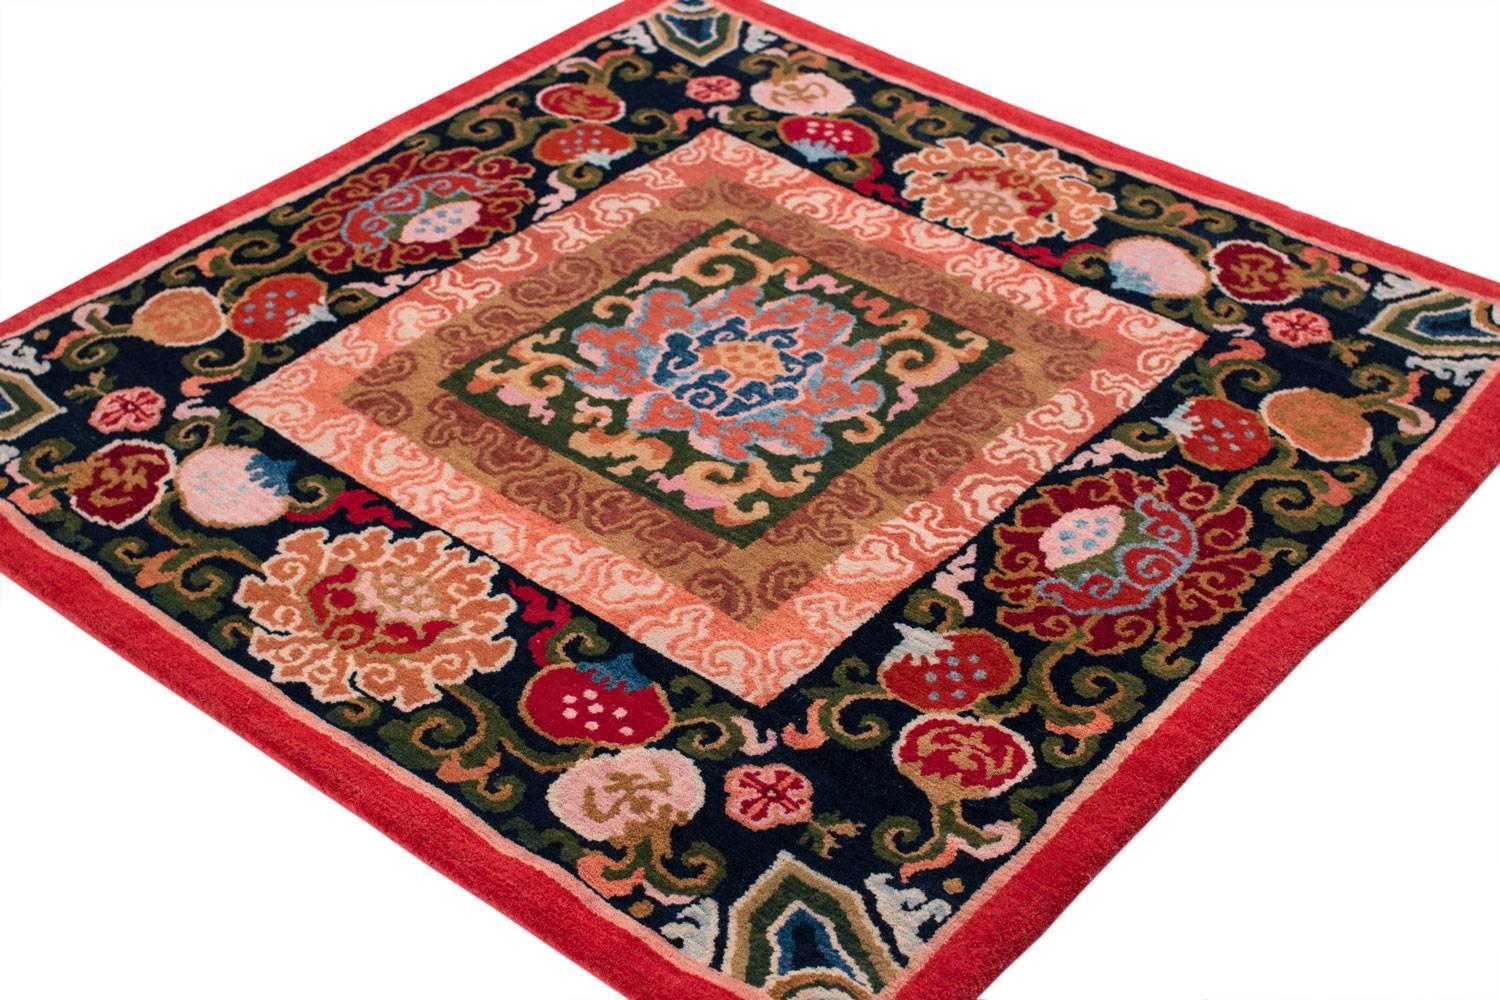 This spectacular reproduction of a small antique Tibetan mat was made with 100% Vegetable dyes made using authentic Tibetan weaving techniques. 100% Himalayan wool.